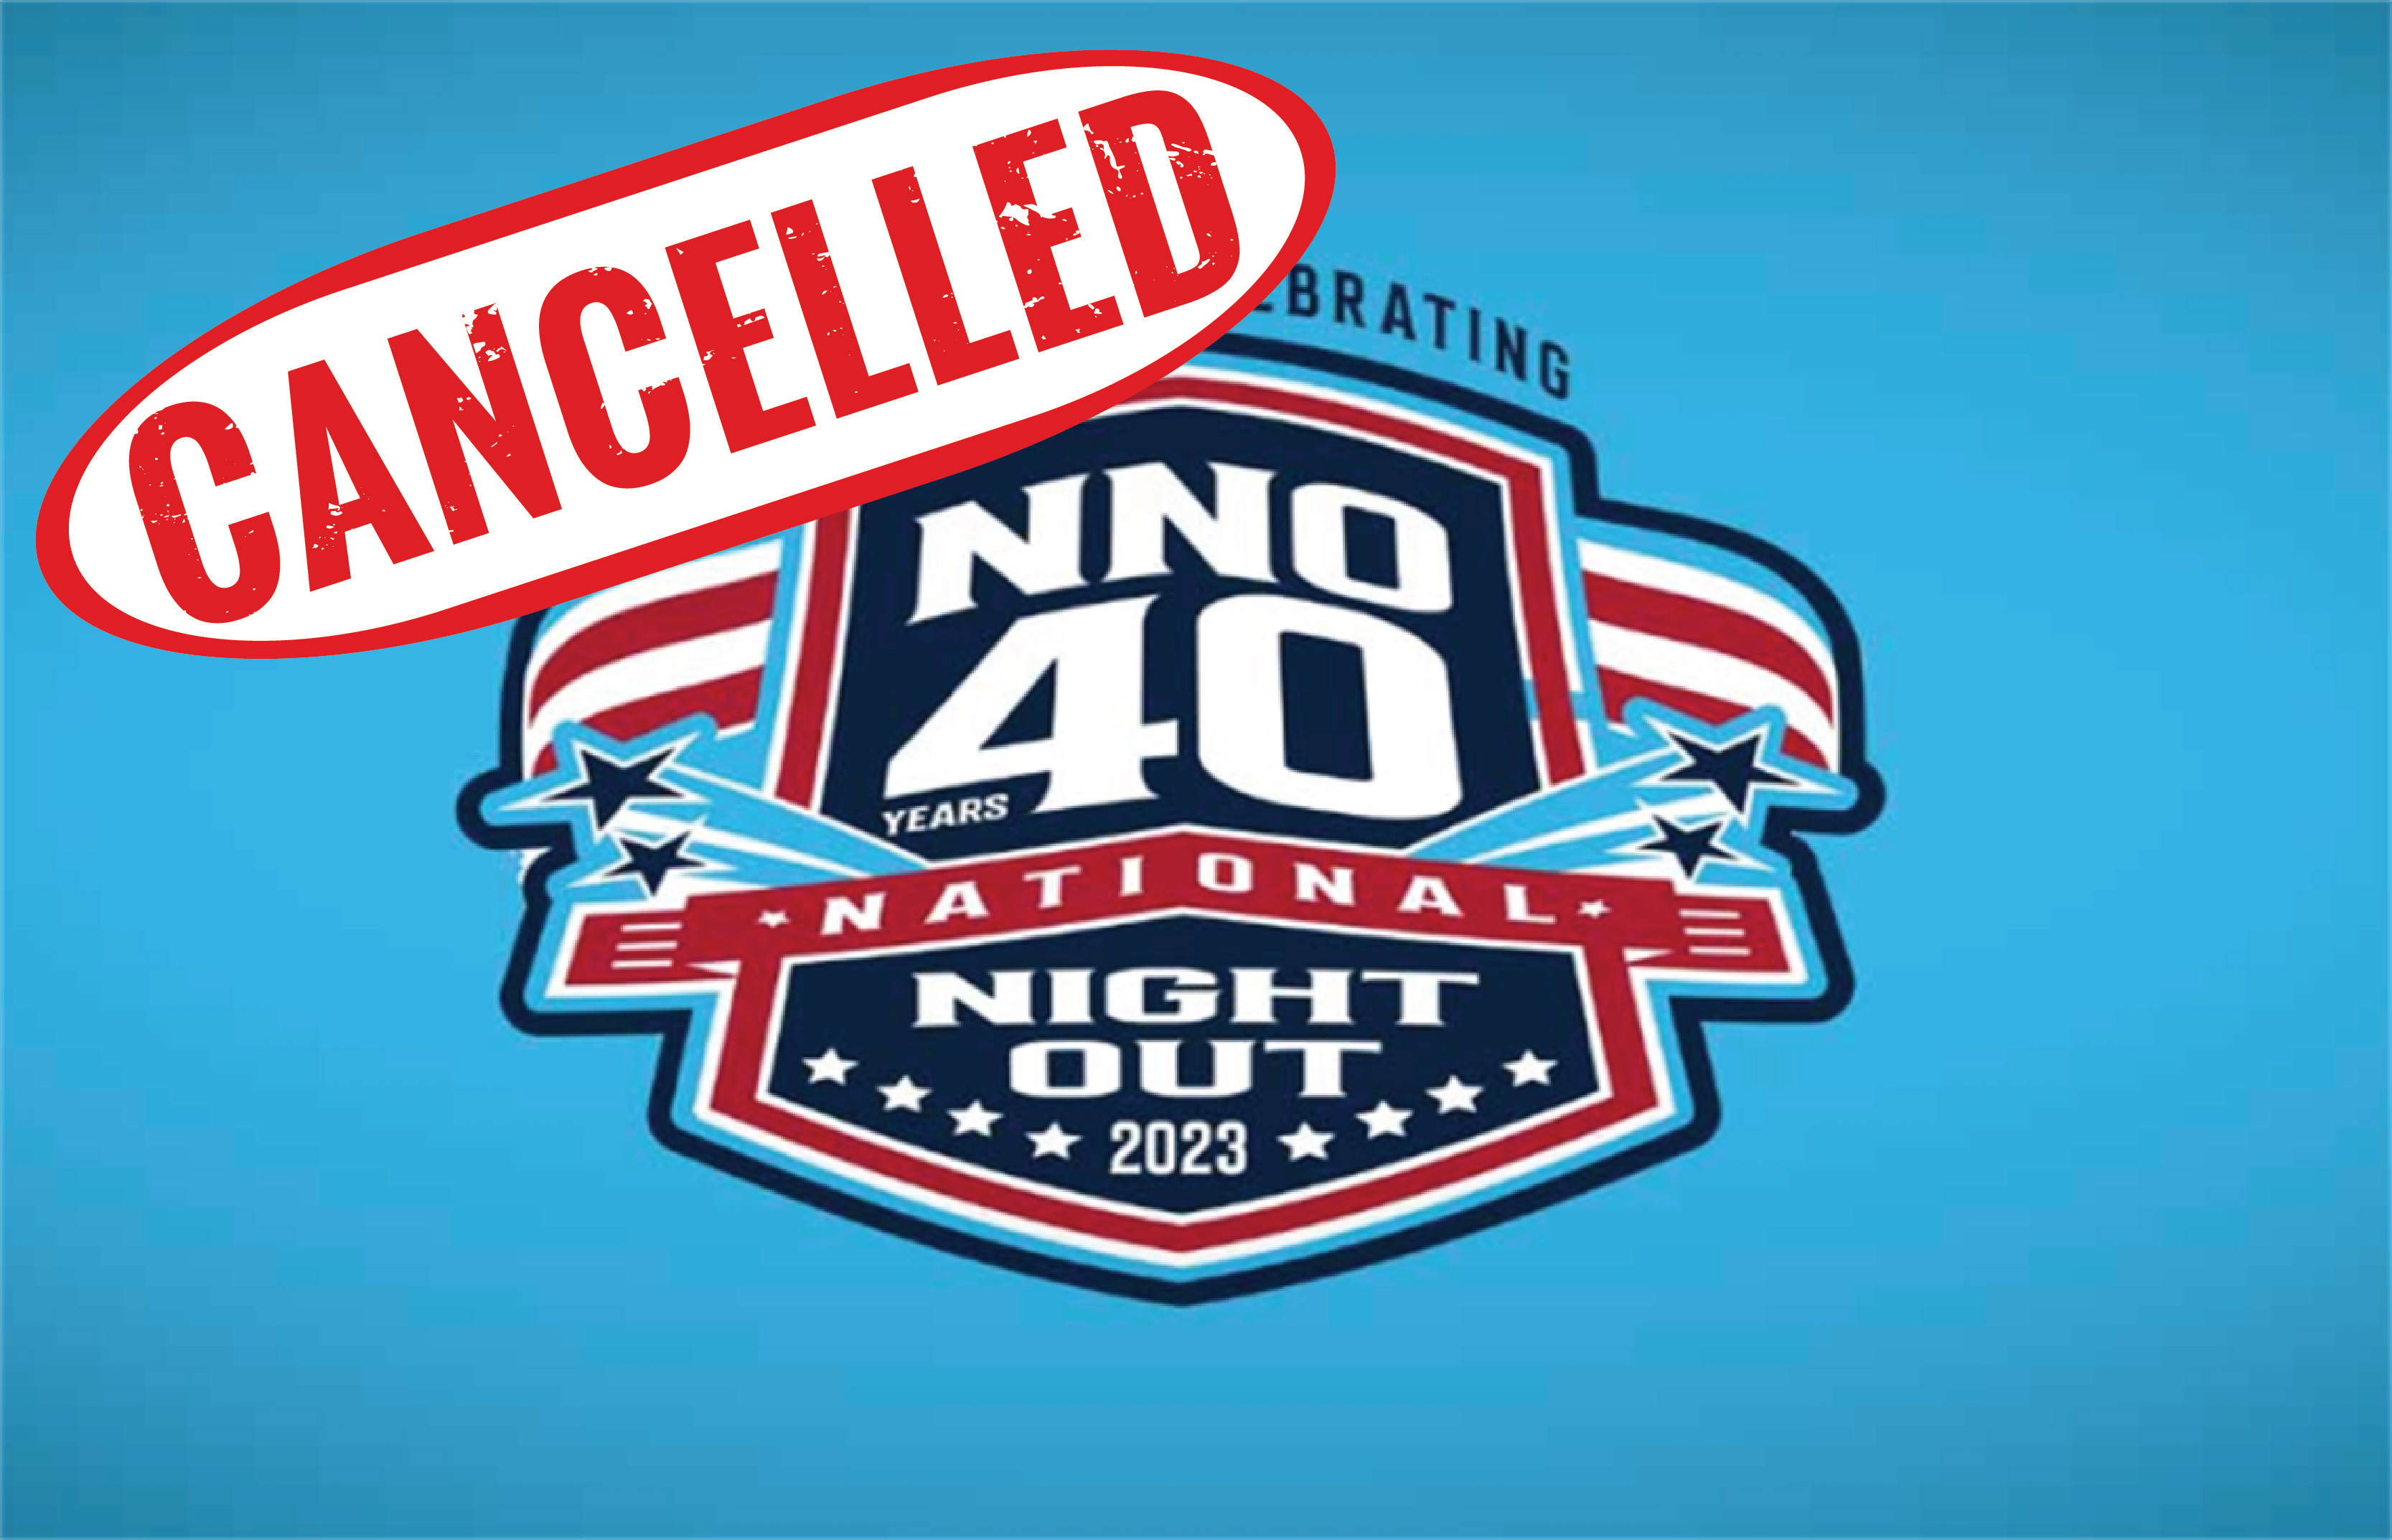 Harvest Bend National Night Out CANCELLED